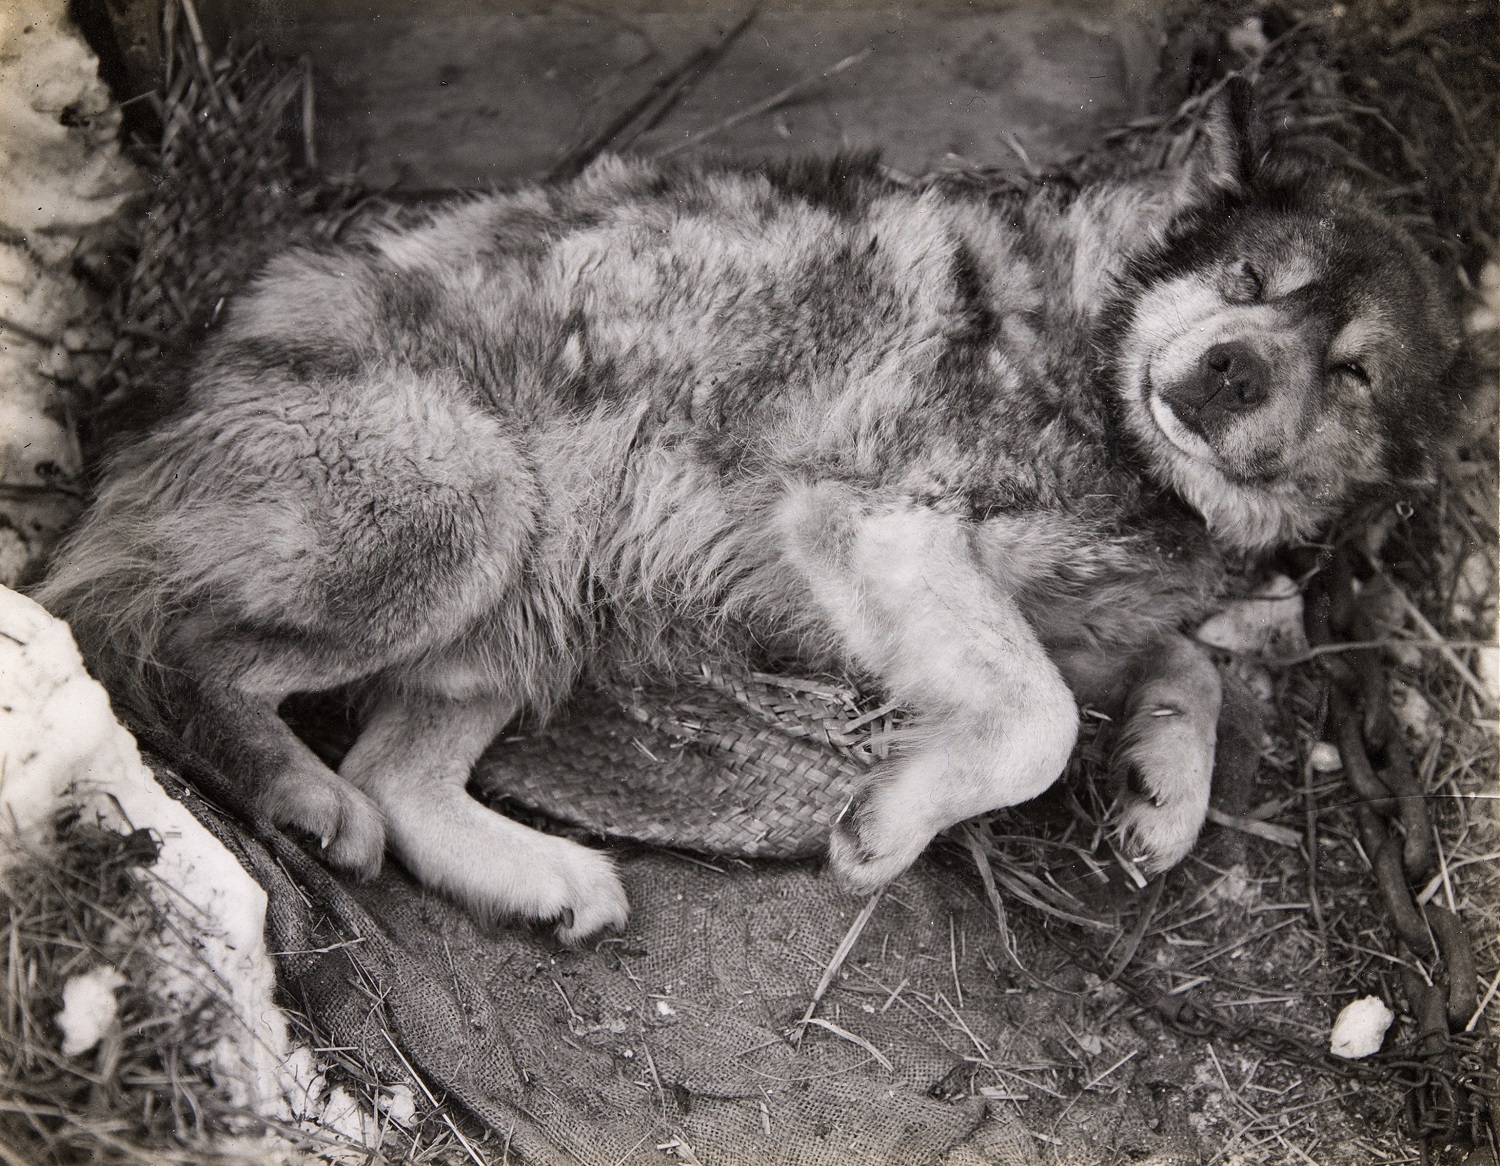 Stareek, a dog on Scott's Terra Nova expedition, photographed in 1911. Canterbury Museum 1975.289.395